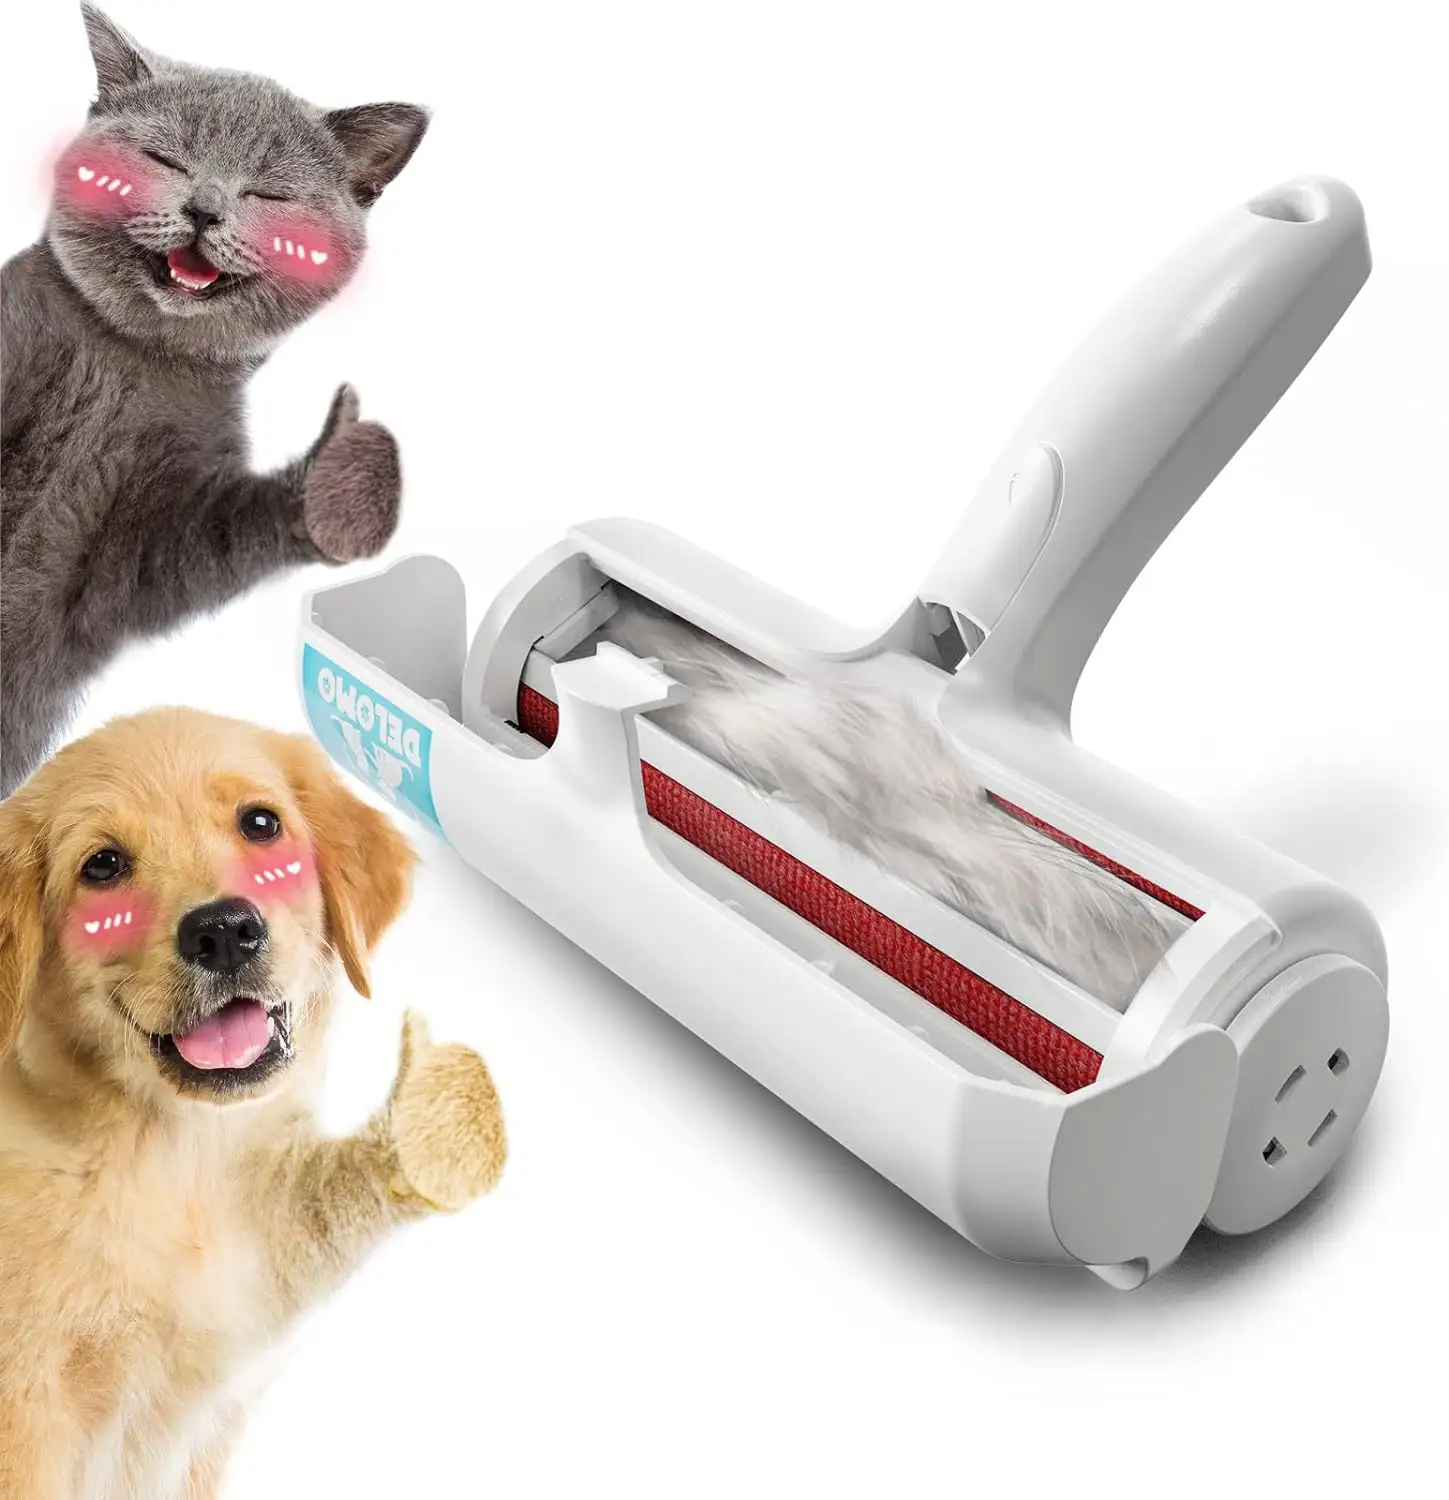 Lint Roller for Pet Hair - Cat and Dog Hair Remover for Couch, Furniture, Carpet, Car Seat